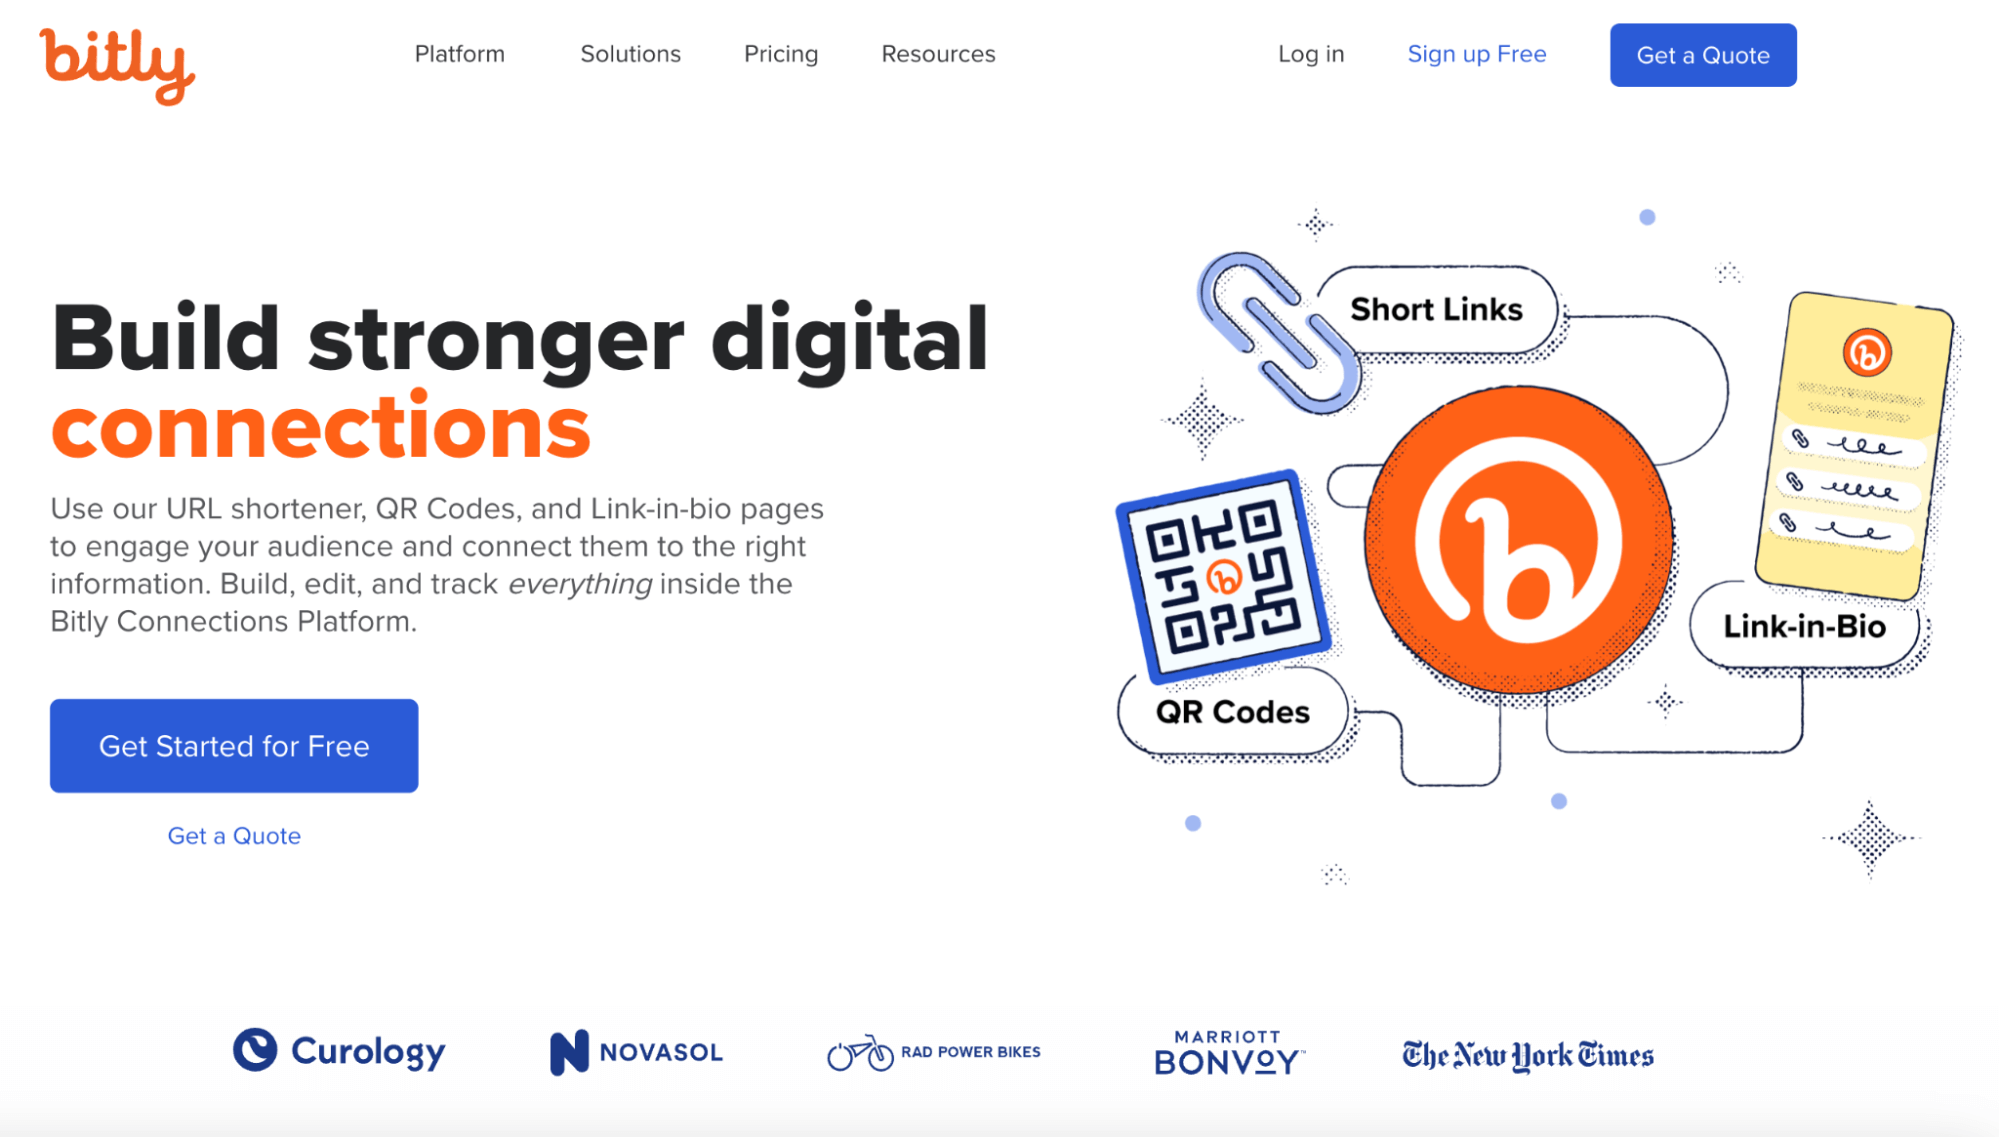 The image displays the homepage of Bitly.com with a headline, “Build stronger digital connections”. The webpage gives options for a quote and free trial. A graphic on the right displays bitly’s capabilities to generate QR codes, Link-in-Bio, and short links.